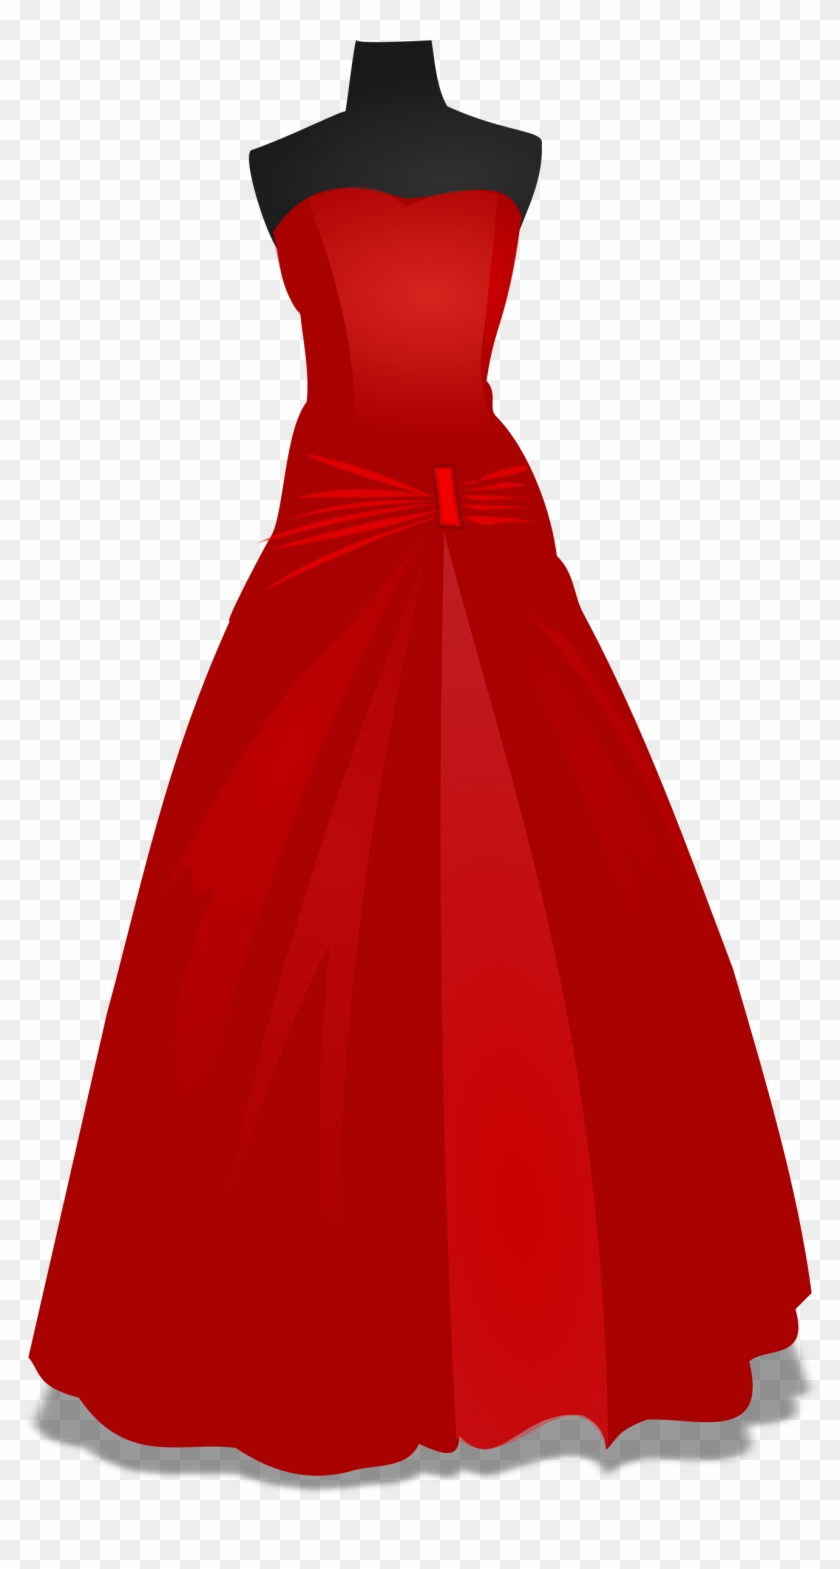 Clipart Gown - Prom Dress Clipart #357822